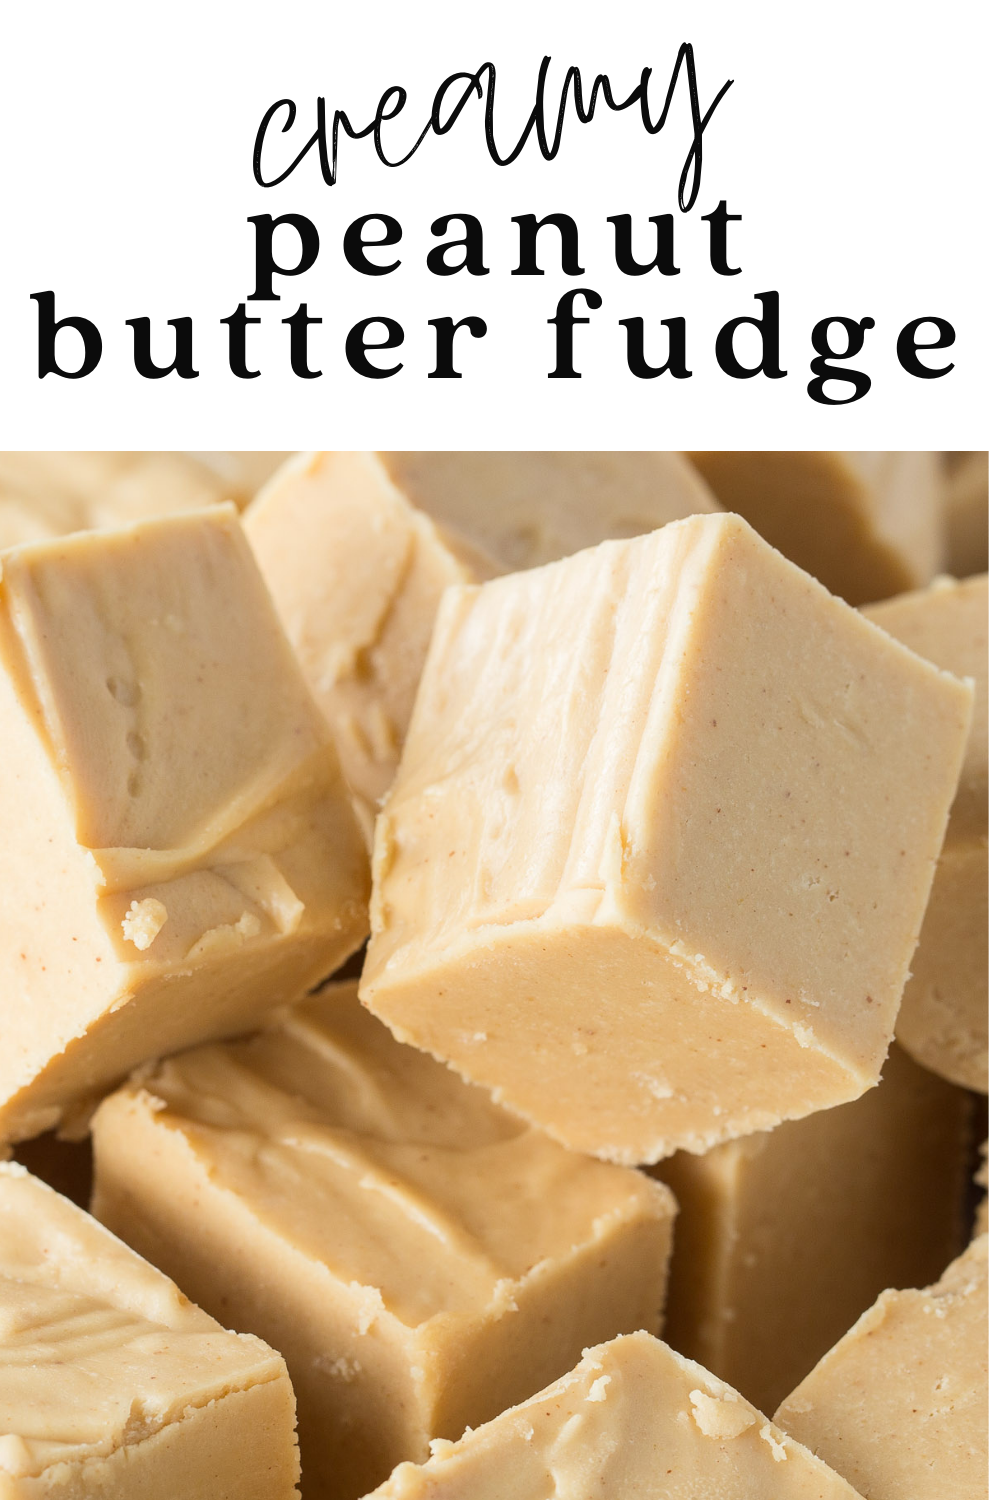 Amazing recipe for creamy, smooth peanut butter fudge. After many batches of trial and error this is a best ever recipe for Creamy Peanut Butter Fudge. via @artandthekitch